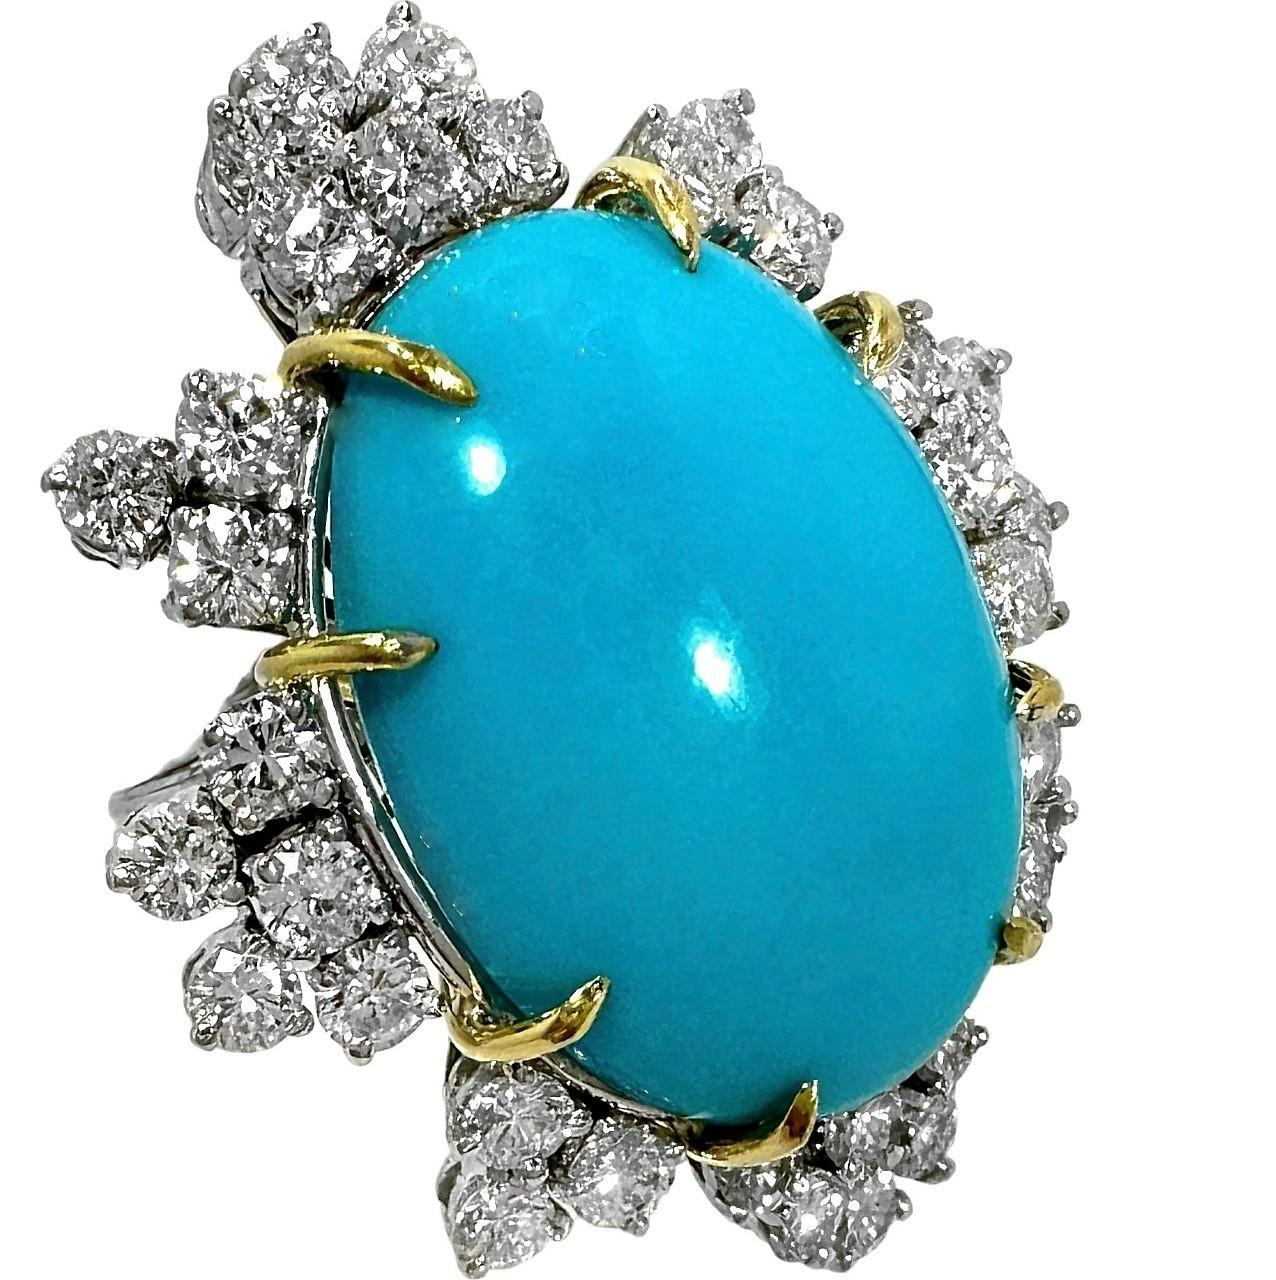 Women's Magnificent Mid-20th Century Turquoise, Diamond and Platinum Cocktail Ring For Sale